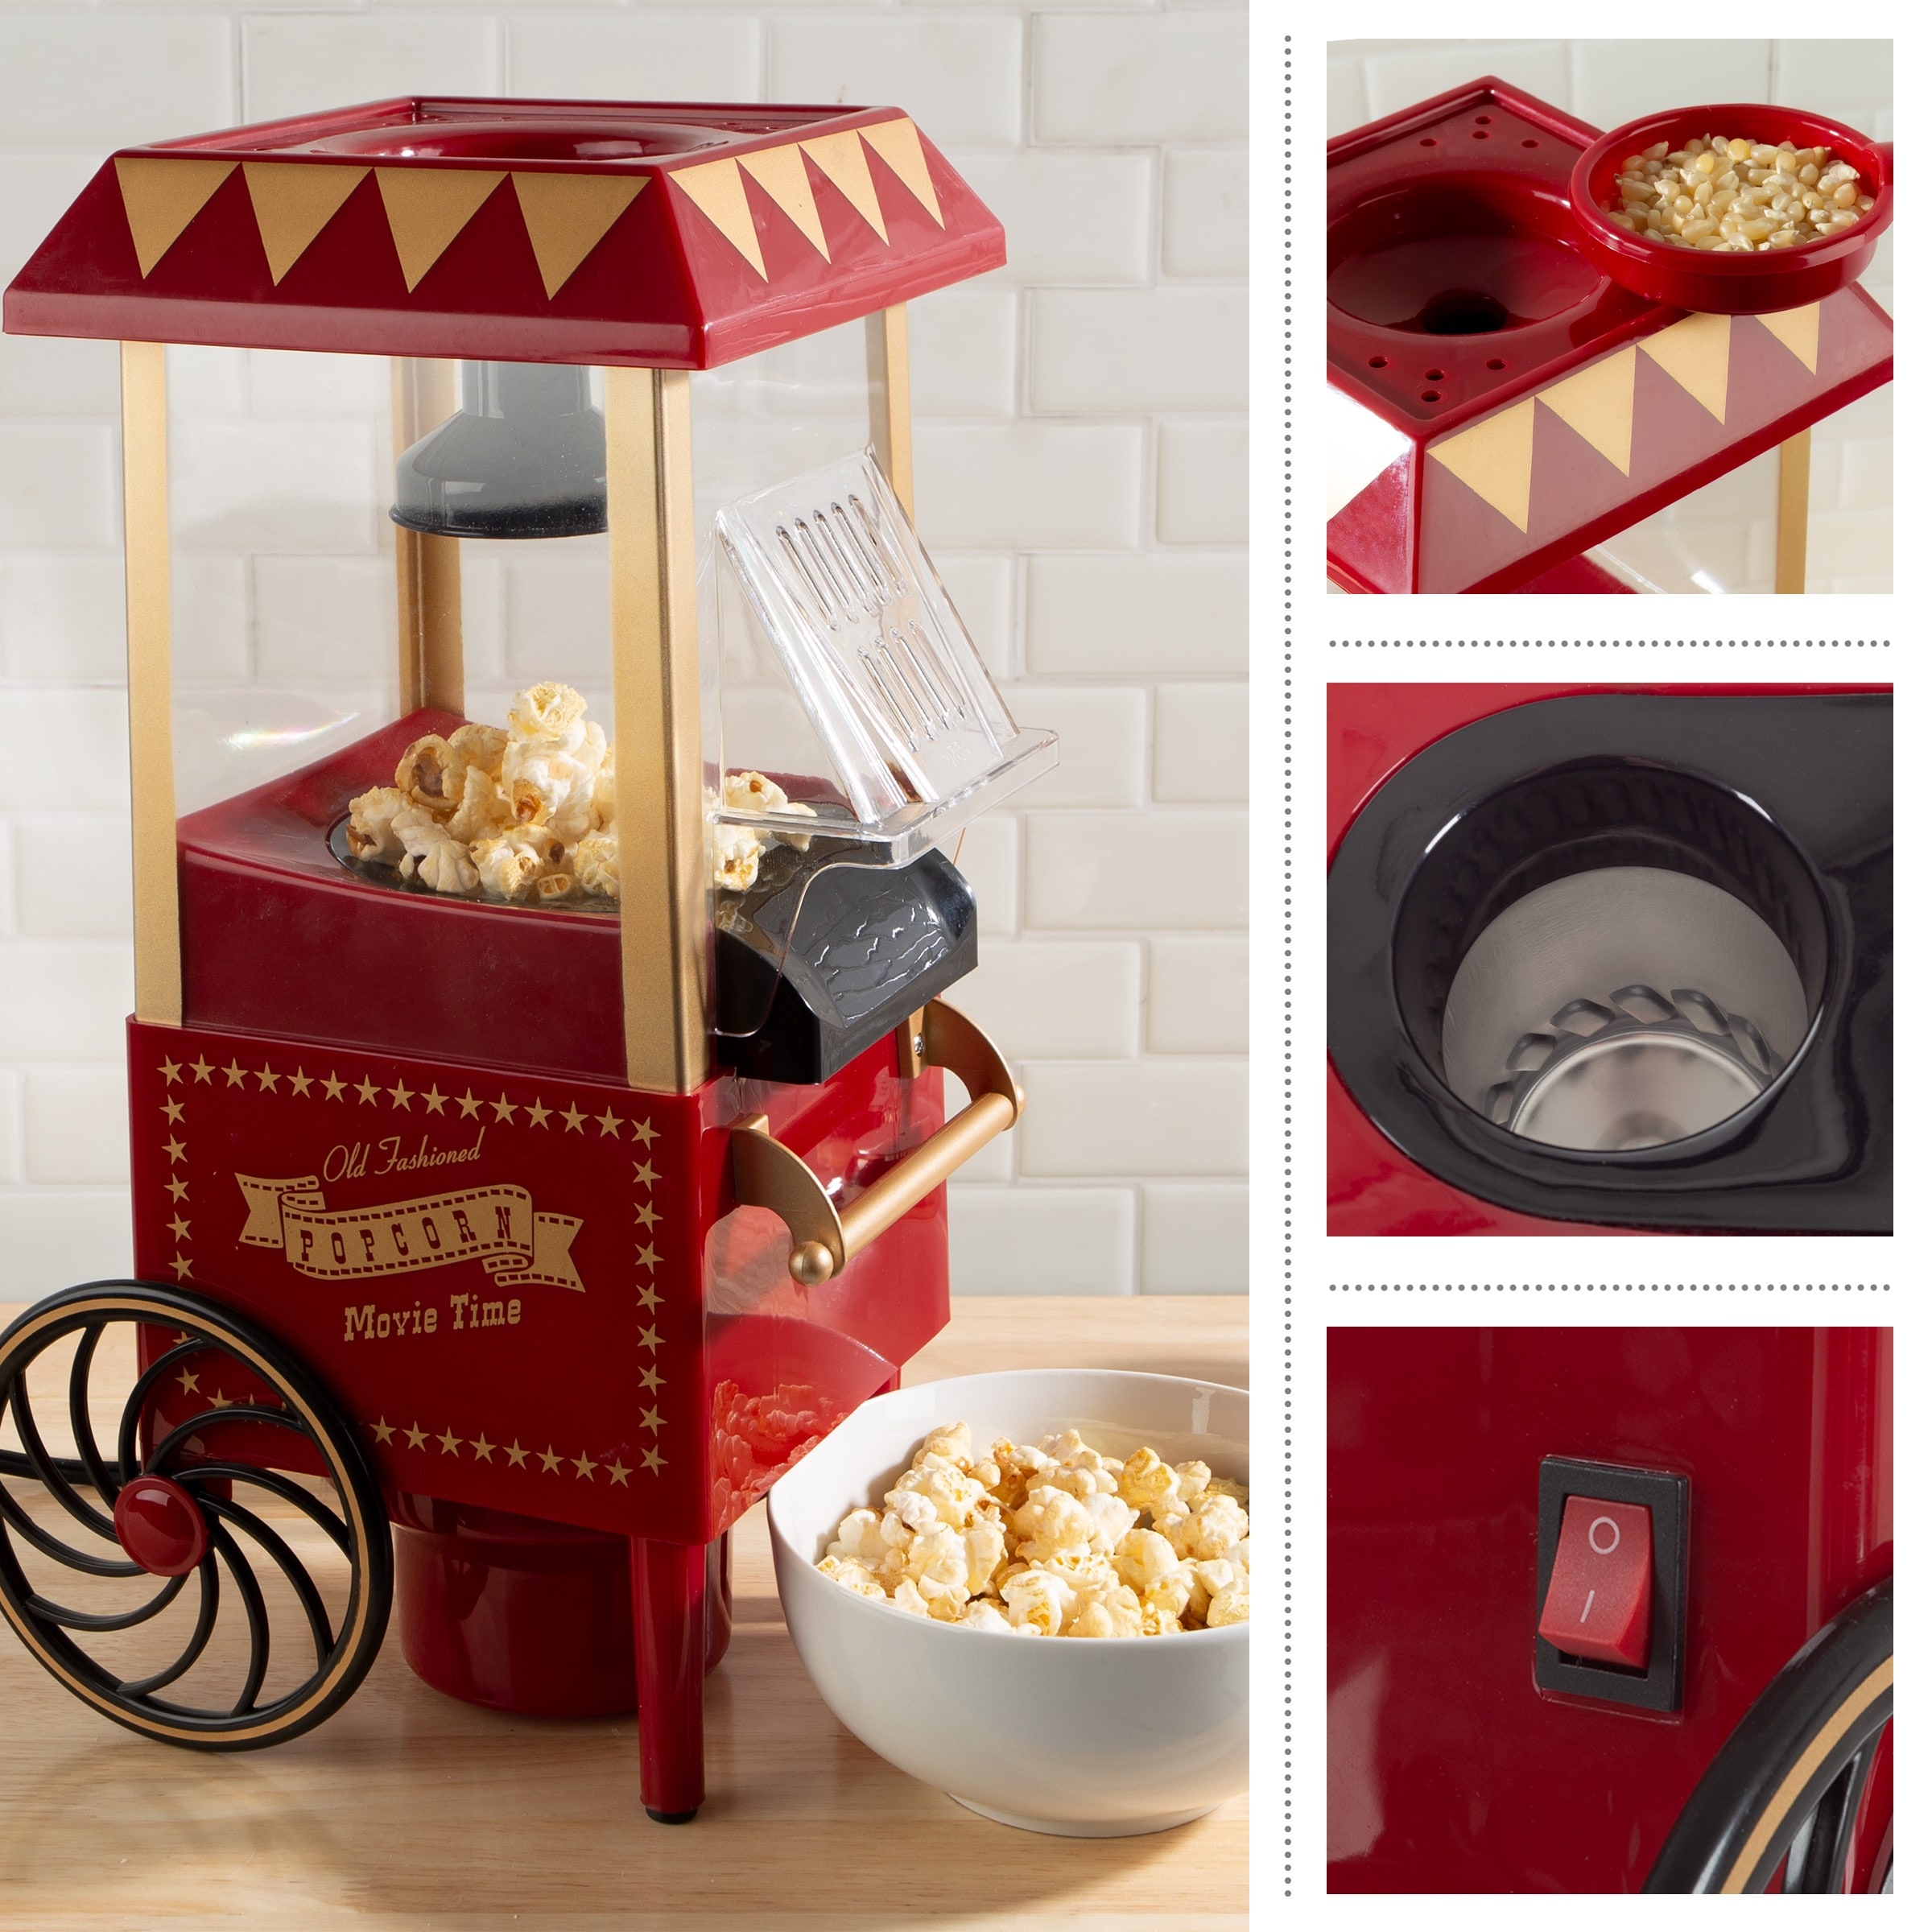 https://ak1.ostkcdn.com/images/products/is/images/direct/4d9ed9af672d0b901cb671a693eb602a0c97a359/Air-Popper-Popcorn-Maker-%E2%80%93-Vintage-Style-Countertop-Popper-Machine-with-6-Cup-Capacity-by-Great-Northern-Popcorn-Company-%28Red%29.jpg